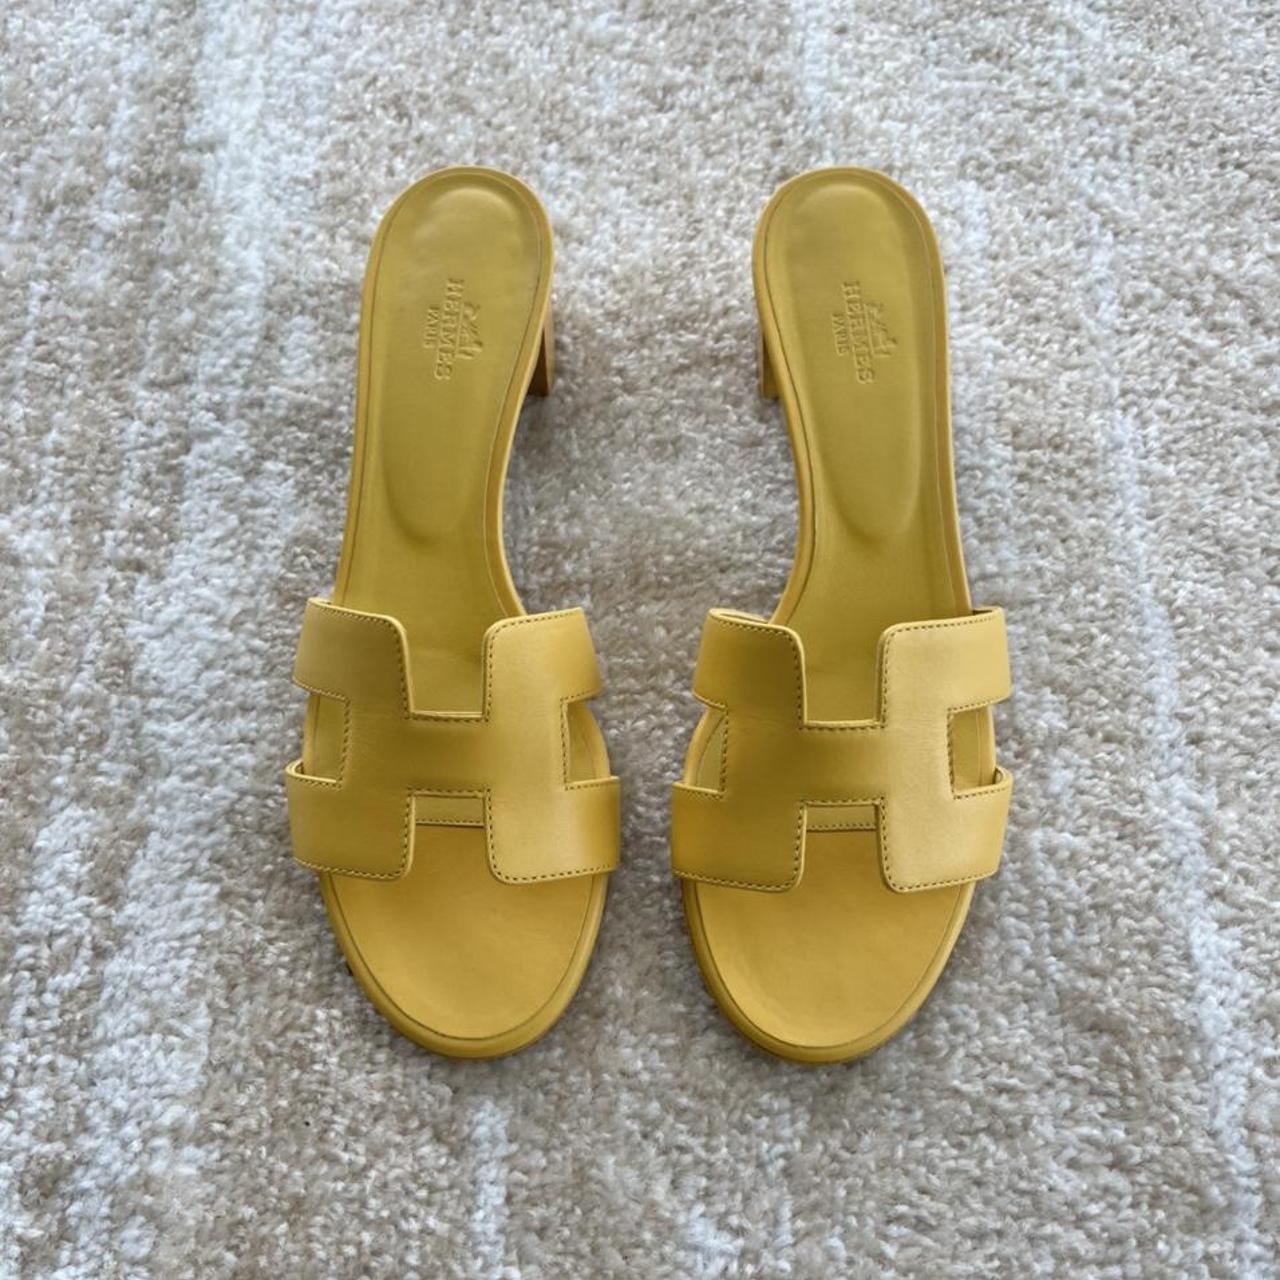 Hermes Chypre Sandals in White, size 40 (fits size 9) – The Sequel Sale